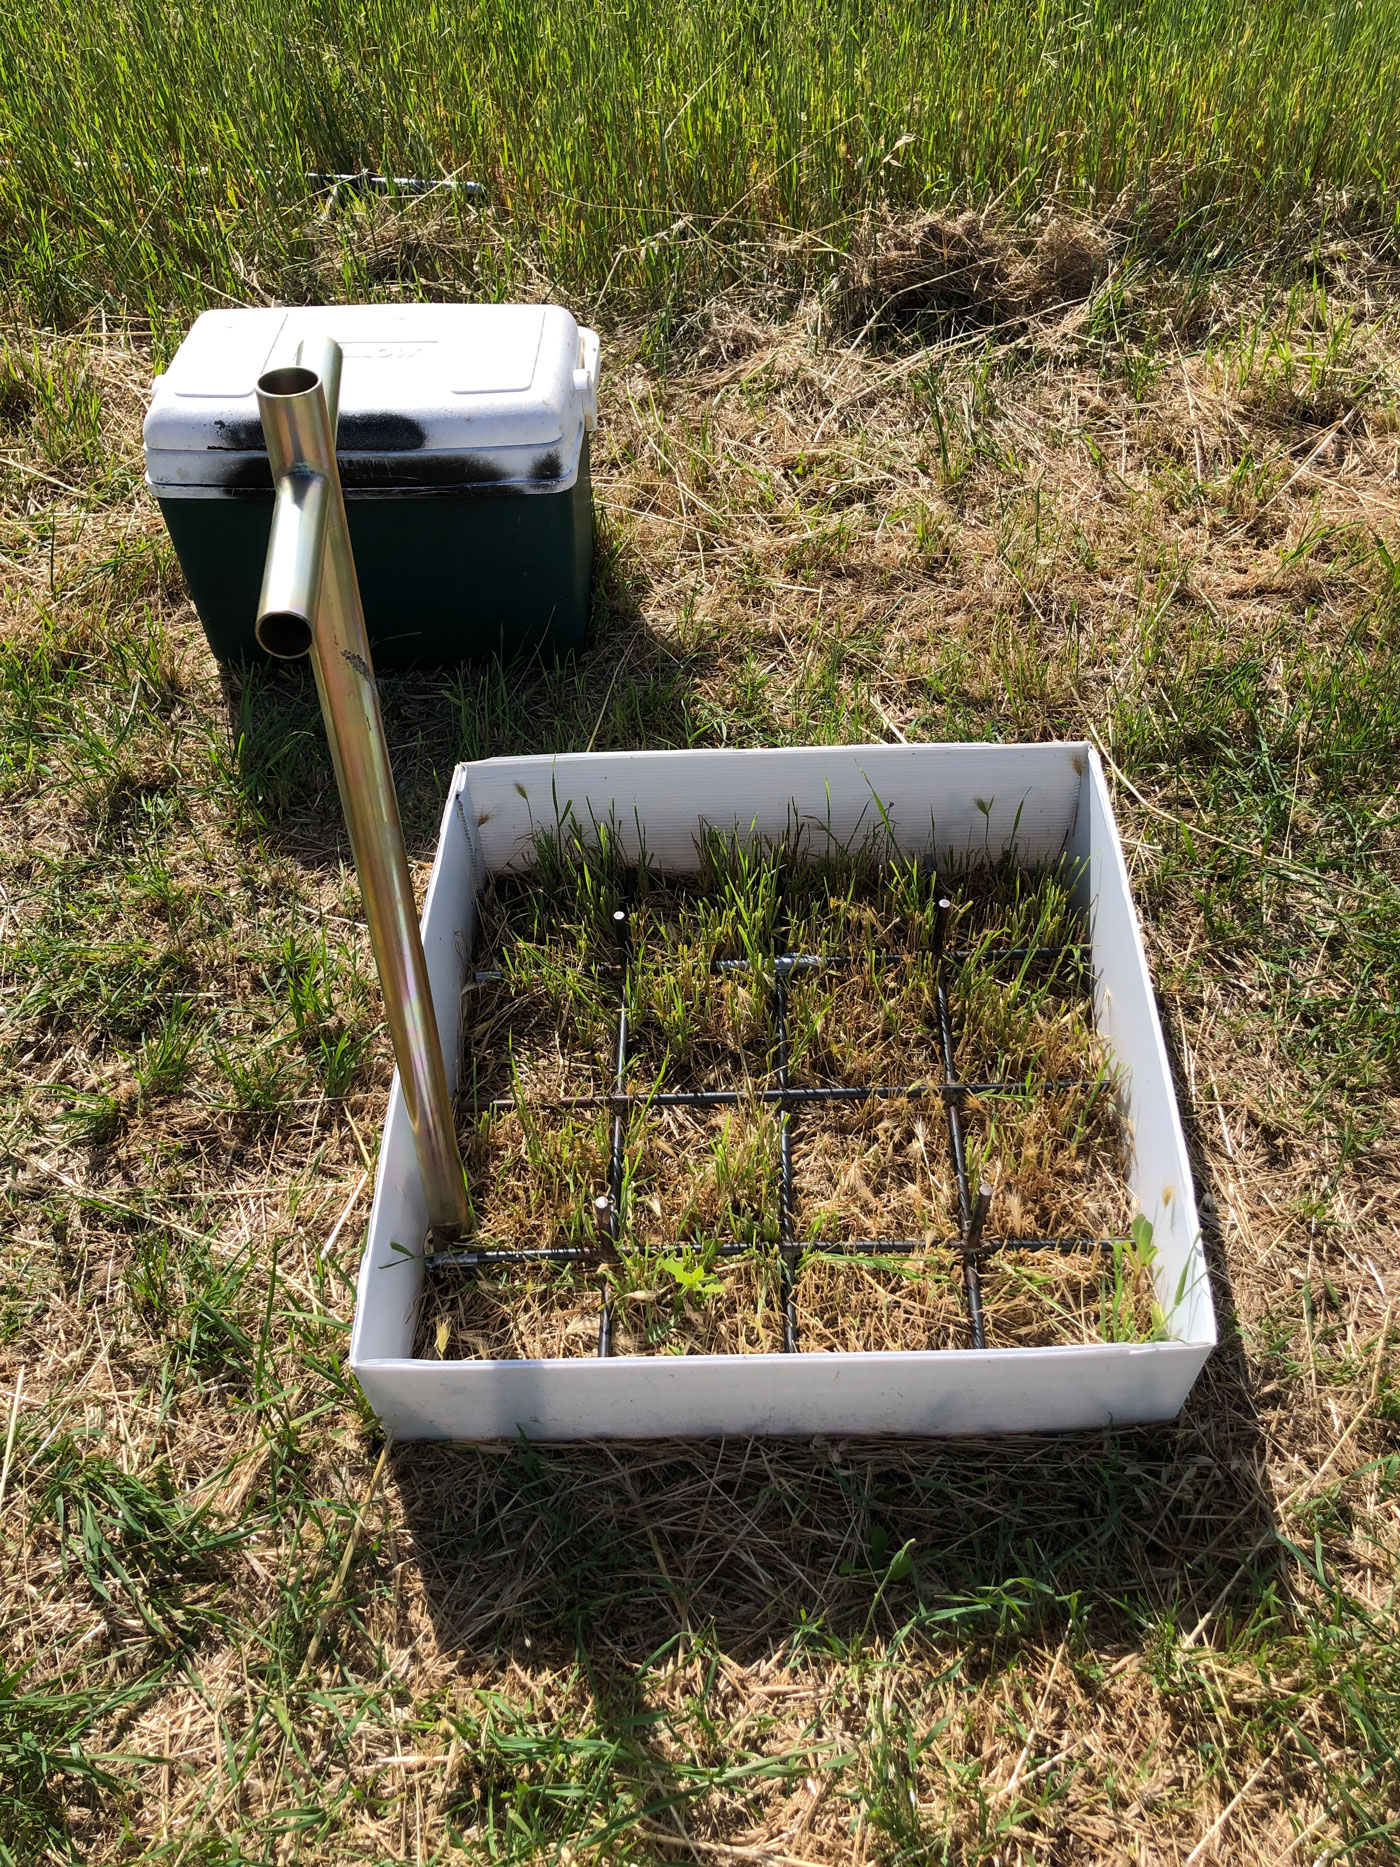 Fig. 3. Soil sampling from the appropriate mesocosm uni